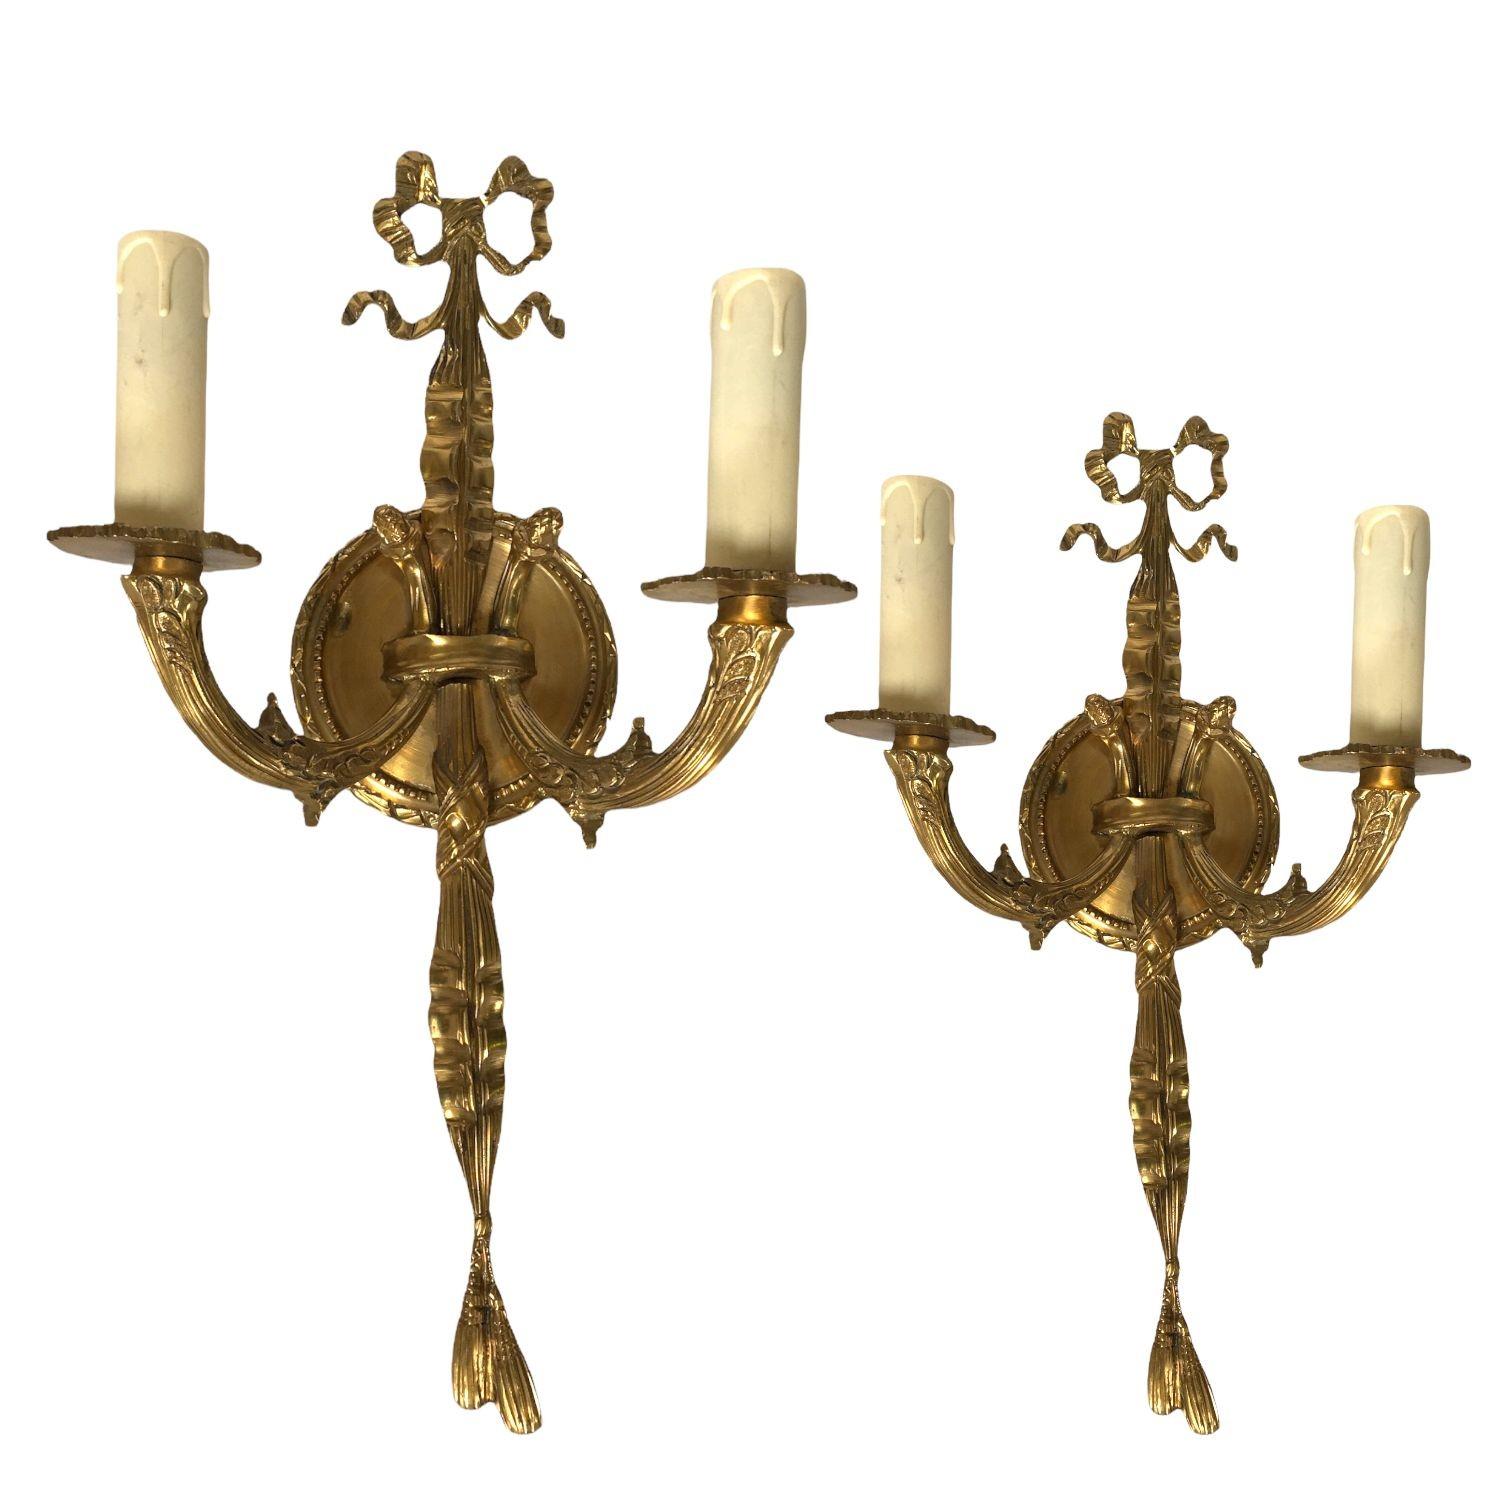 Vintage Pair of Solid Brass Wall-mount Sconces.

These Louis XVI-style brass wall sconces epitomize timeless elegance with meticulous craftsmanship. Their intricate brasswork and opulent design make them a historically sophisticated addition to any